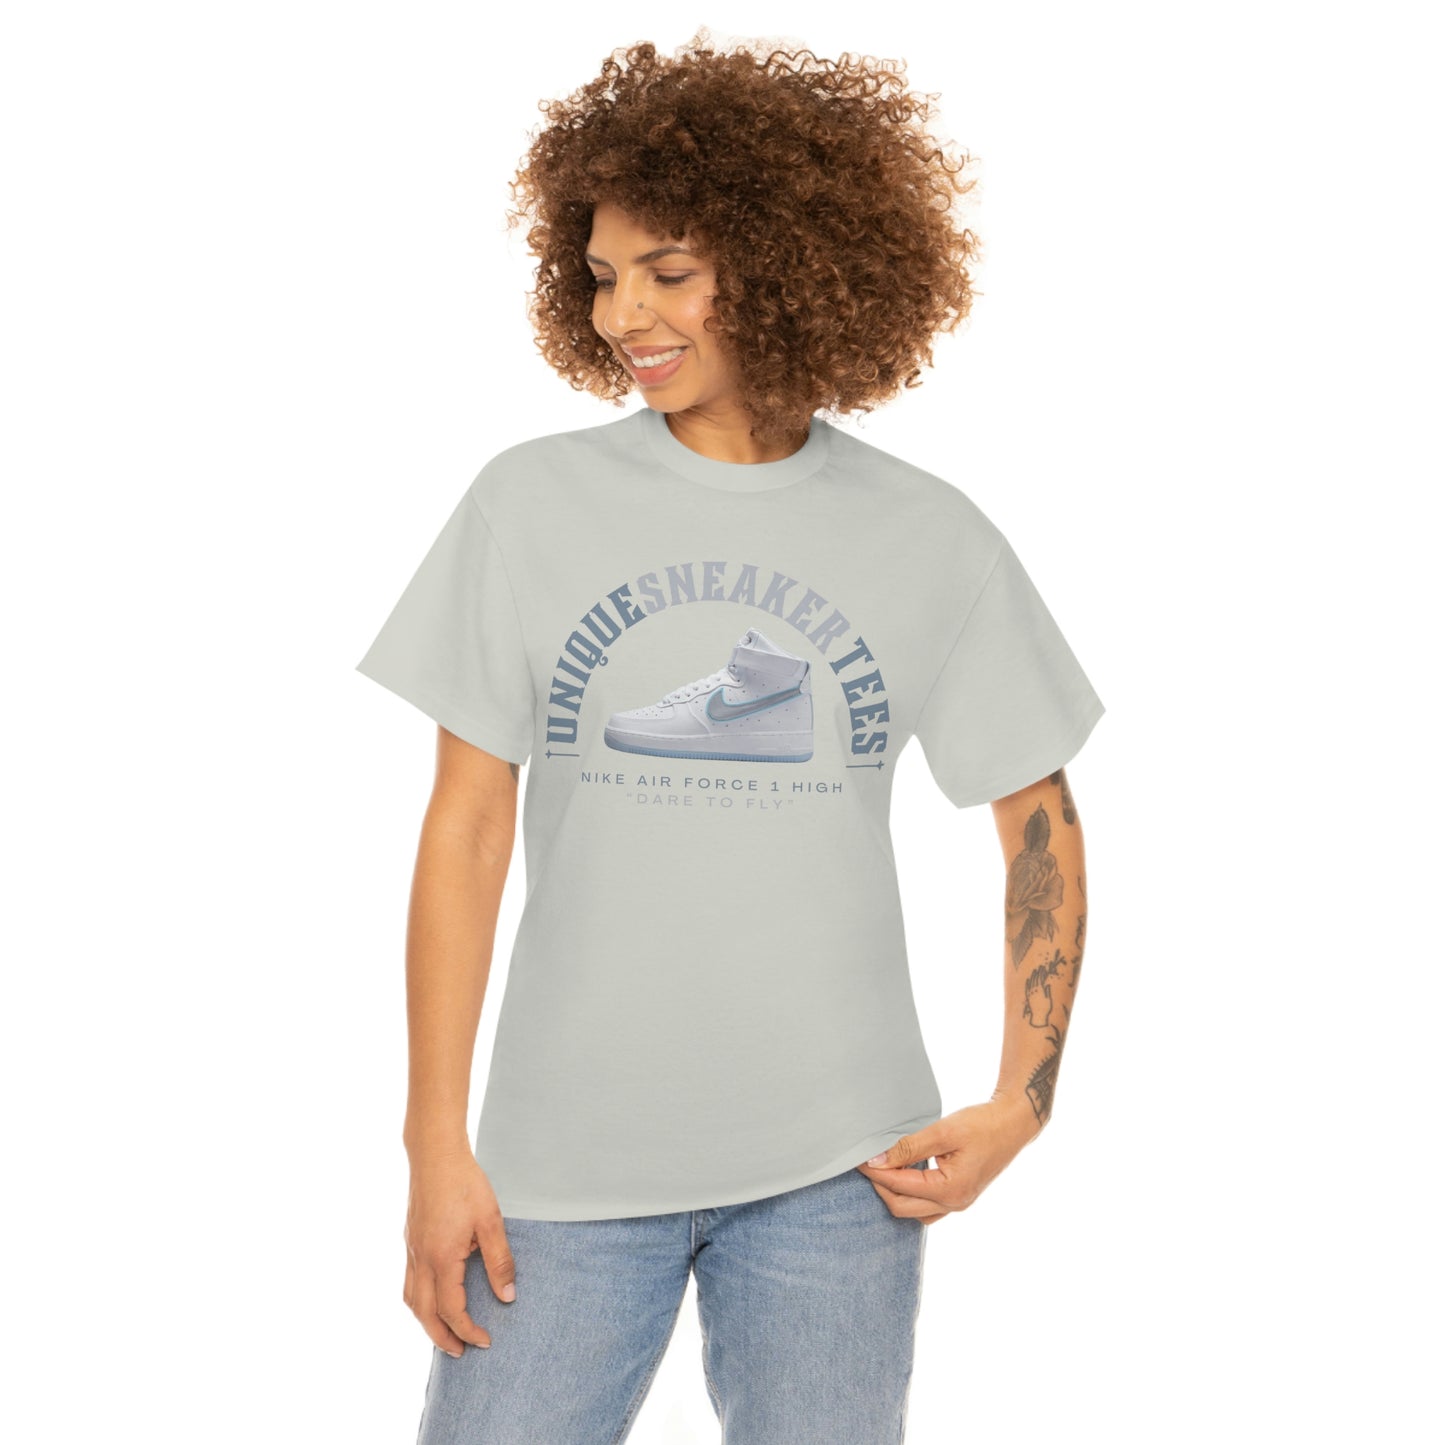 Air Force 1 High Dare To Fly Tee